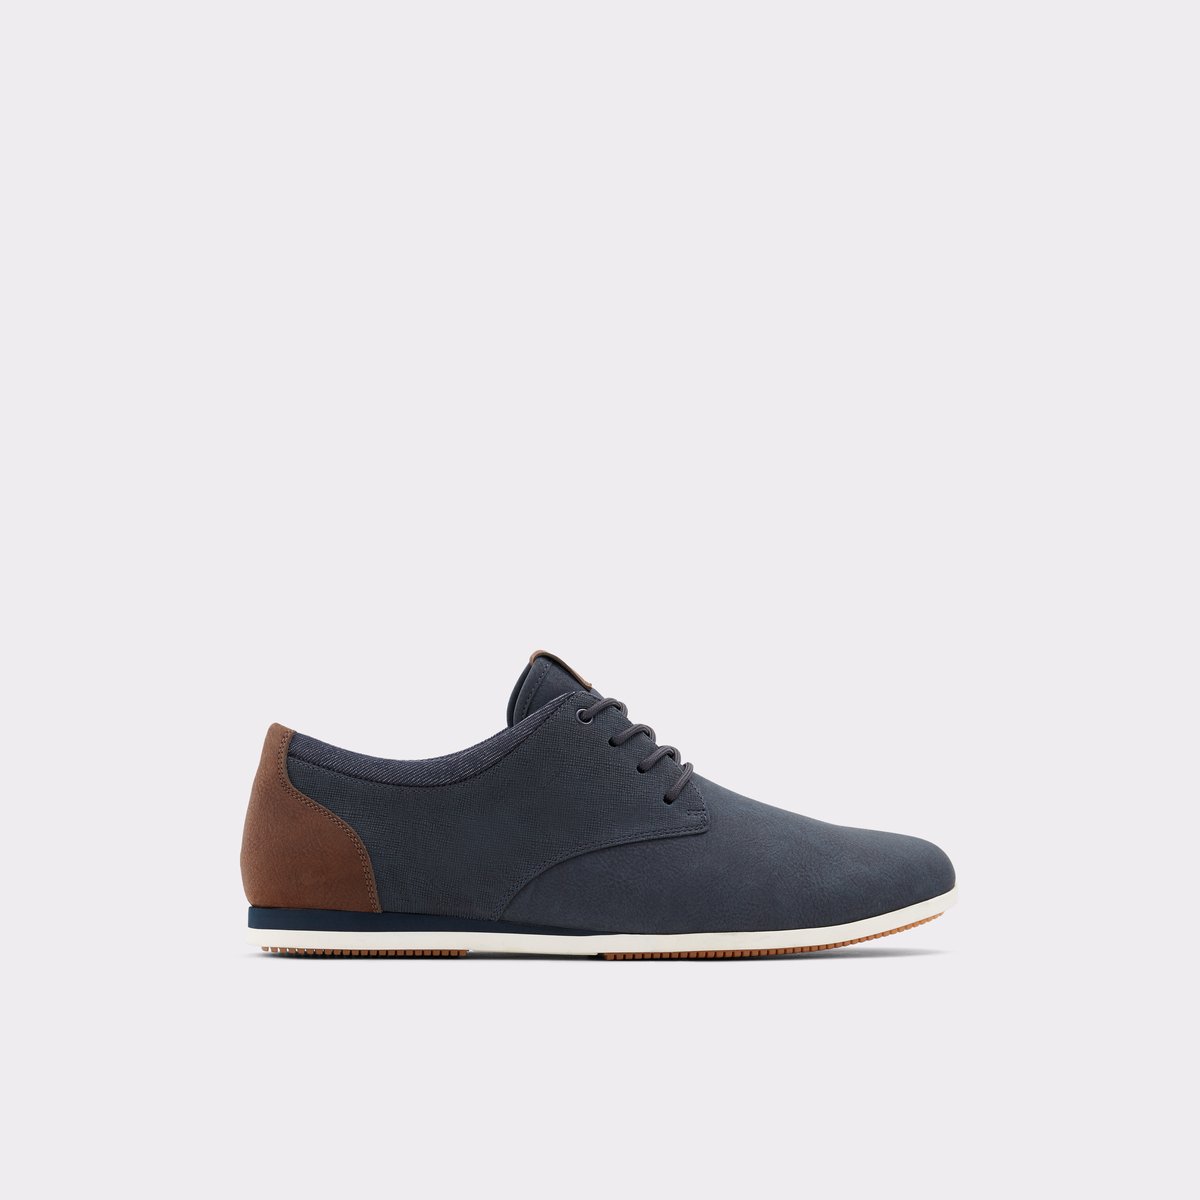 Aauwen-r Navy Synthetic Smooth Men's 